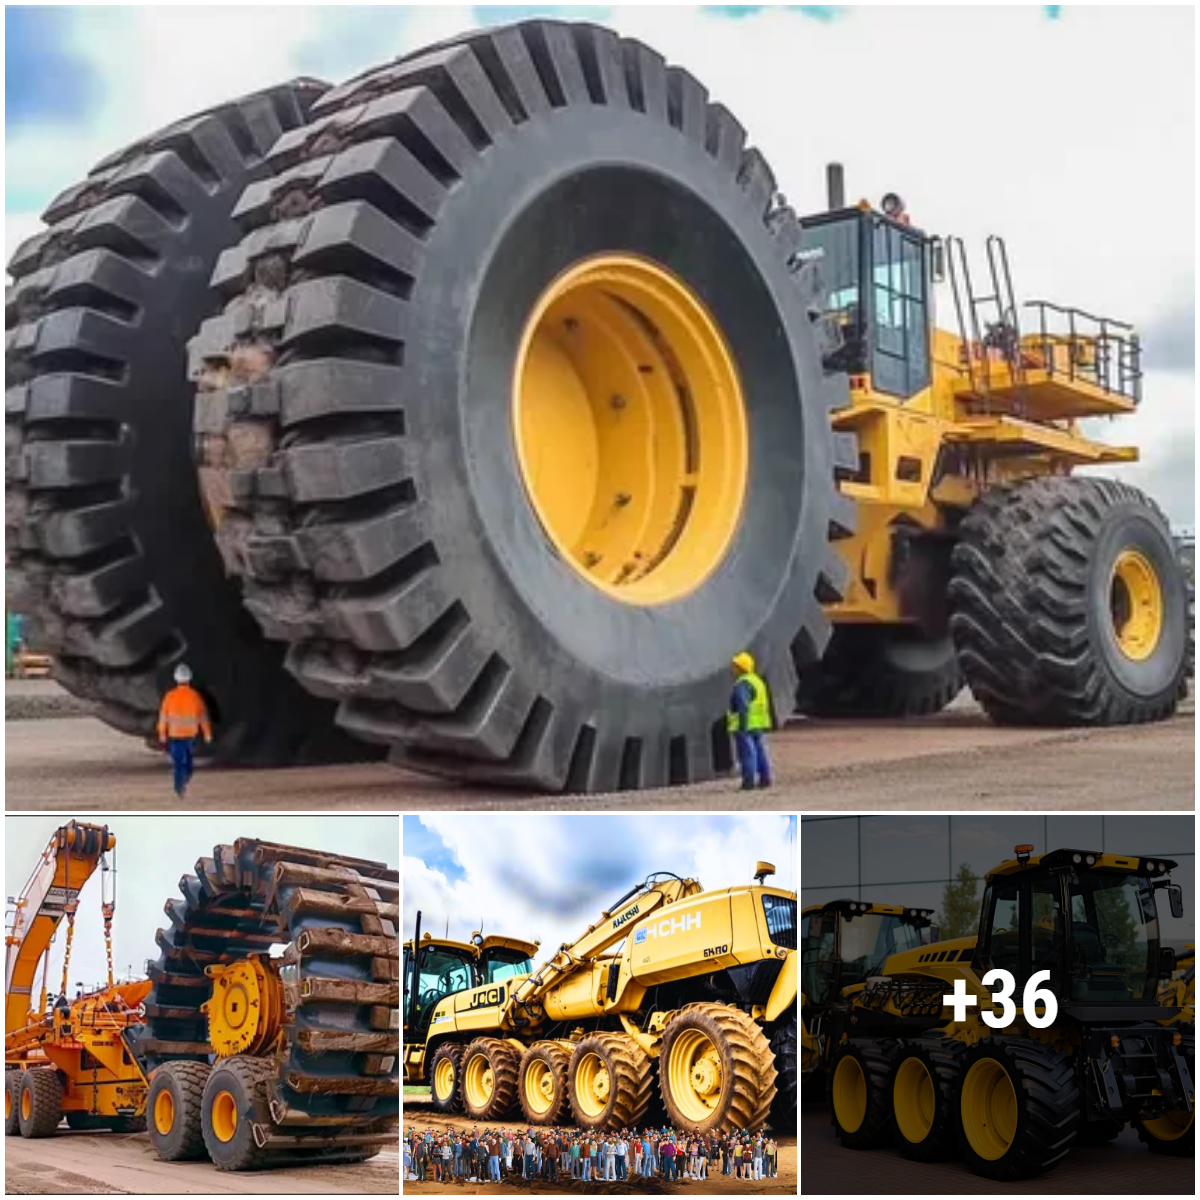 Discover the world’s most efficient way to produce large heavy equipment